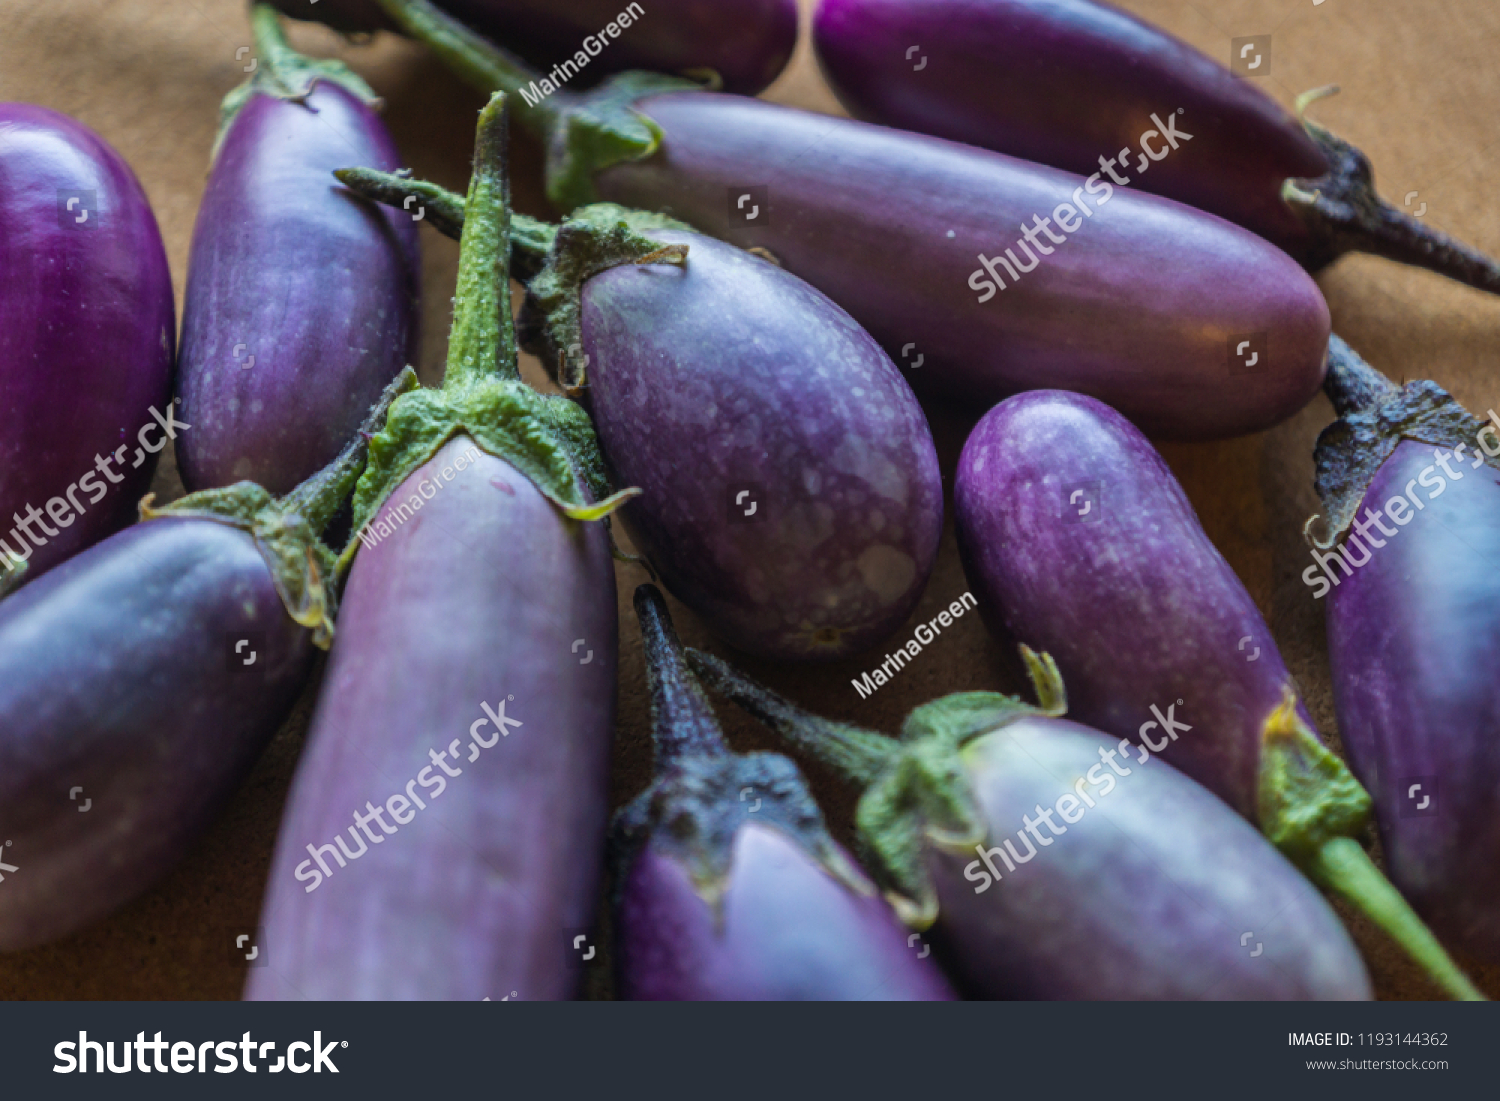 Shiny organic purple eggplants of dwarf heirloom variety Slim Jim from Italy, edible fruits of Aubergine plant grown in the city and harvested on the balcony as a part of urban gardening project #1193144362